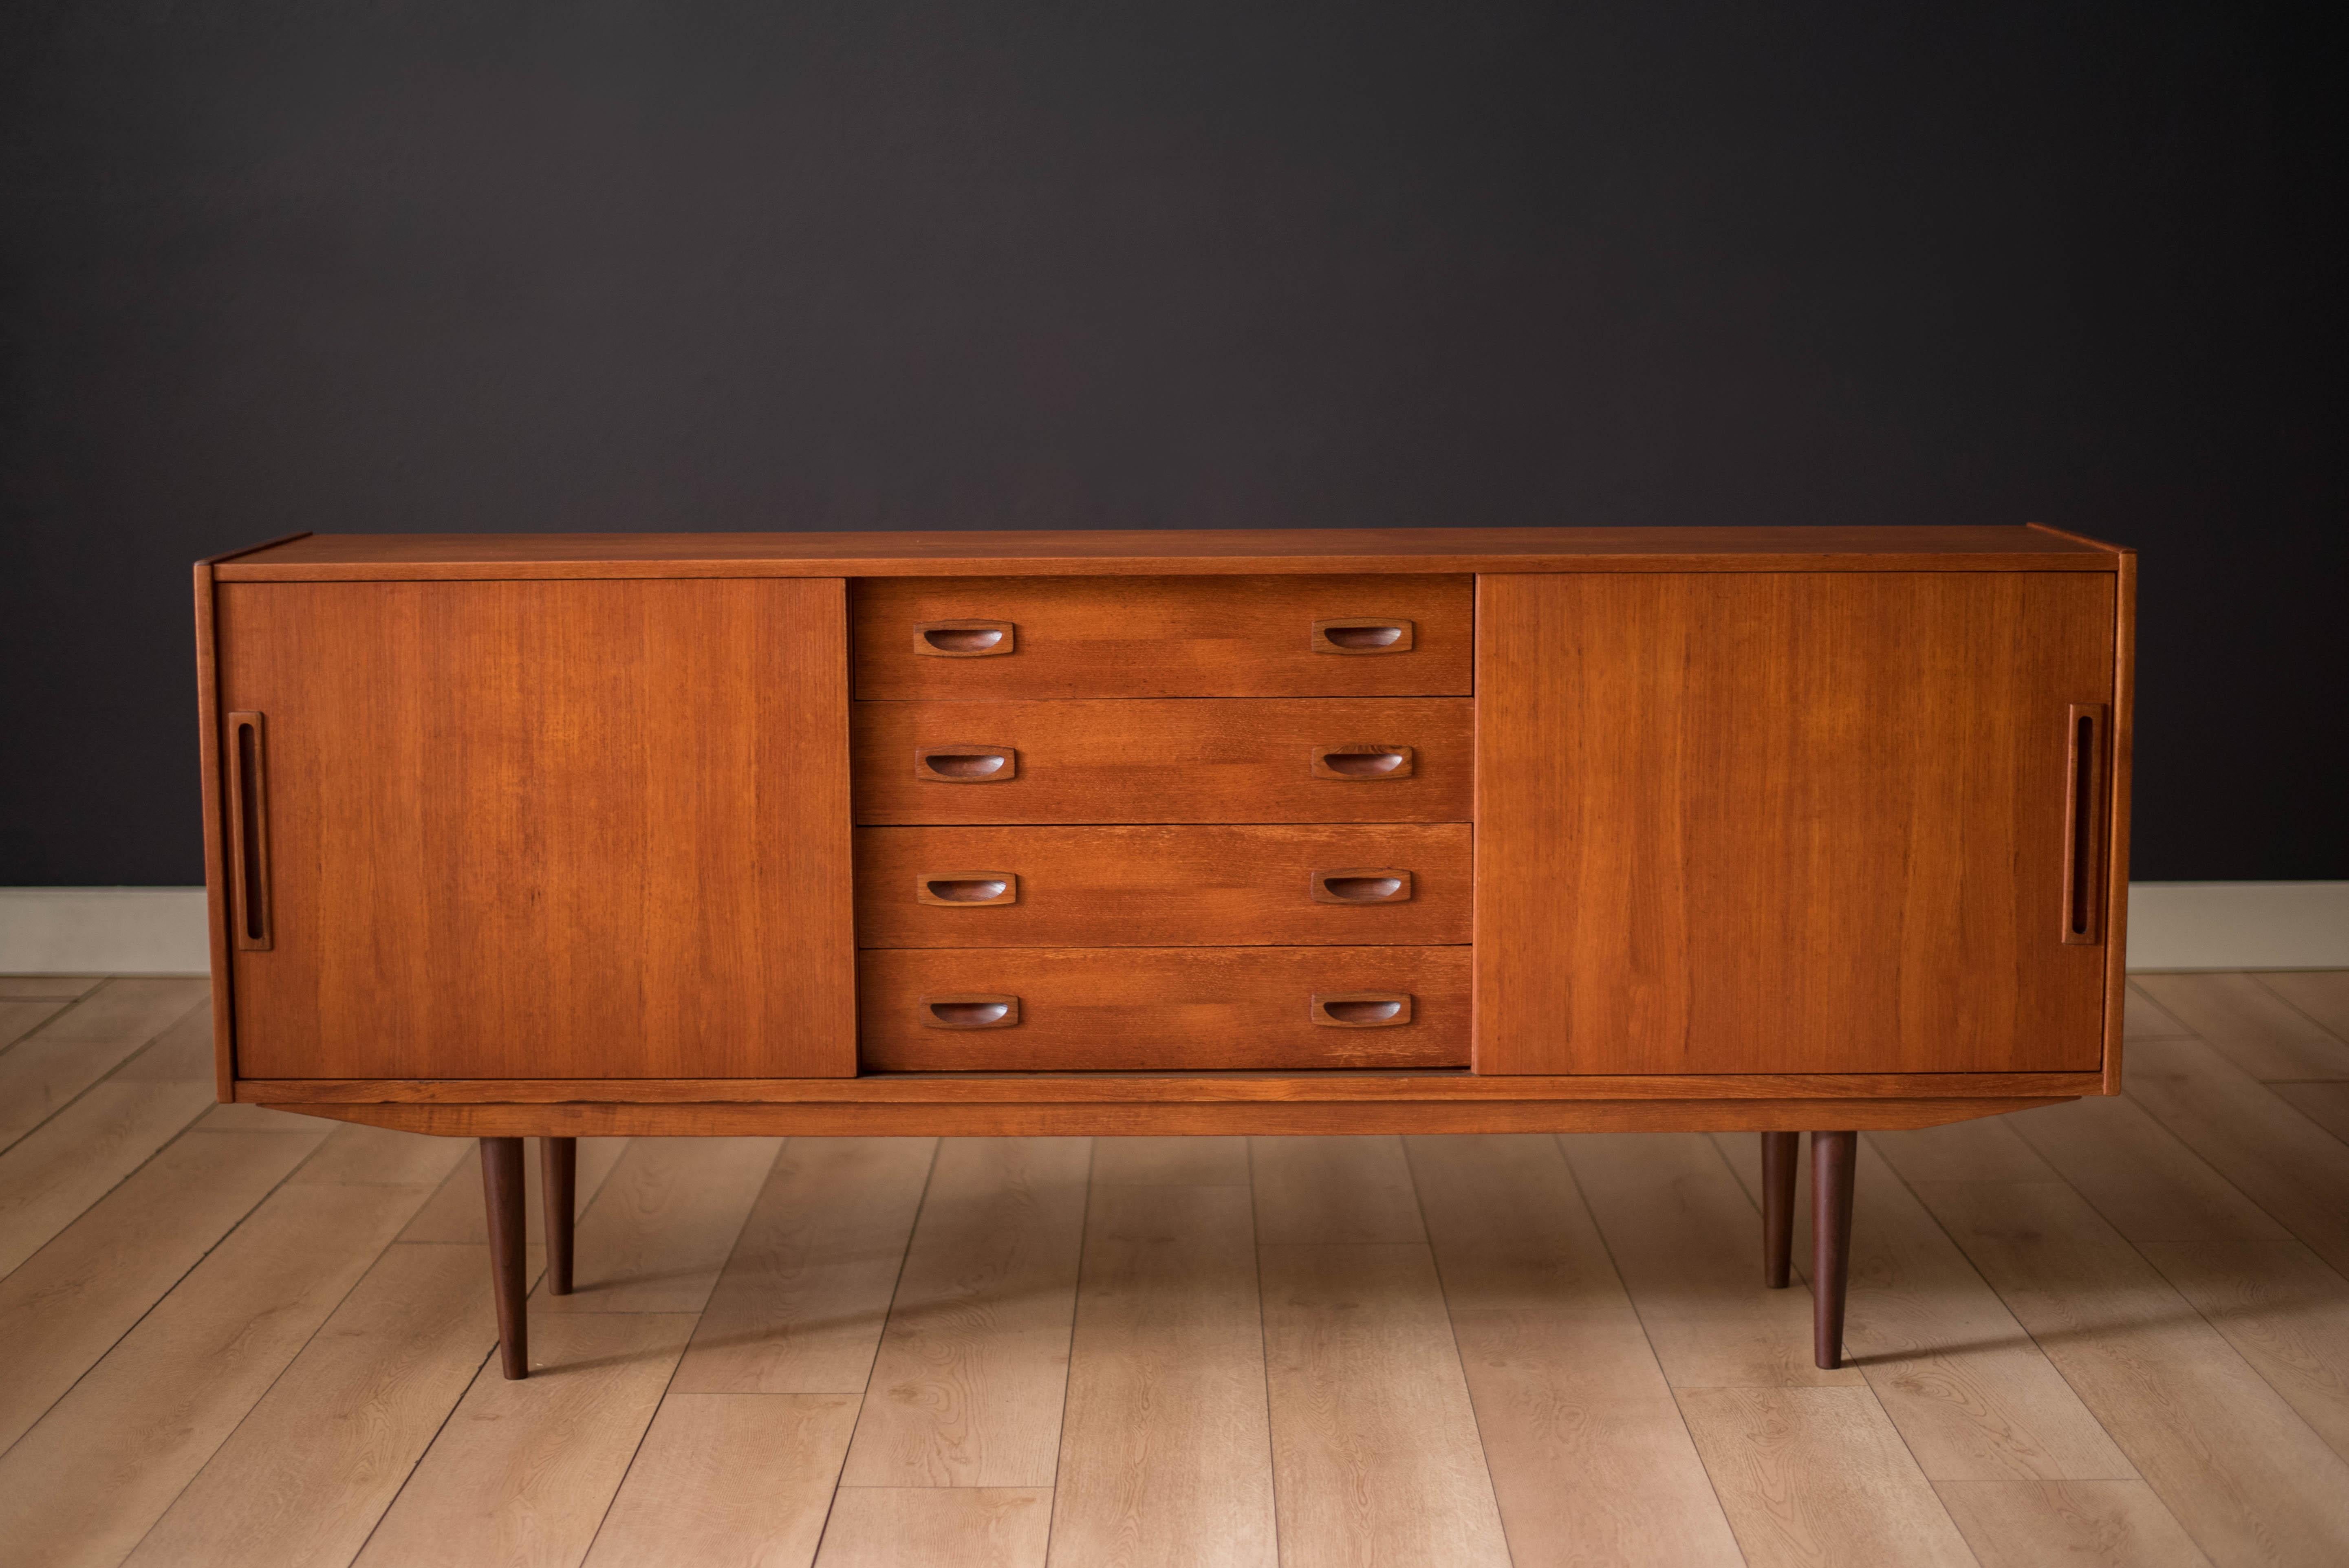 Mid-Century Modern sideboard credenza in teak circa 1960's. This showcase storage piece features four dovetailed drawers accented with solid teak afromasia sculpted handles. Sliding doors reveal two interior cabinets with a removable single shelf.